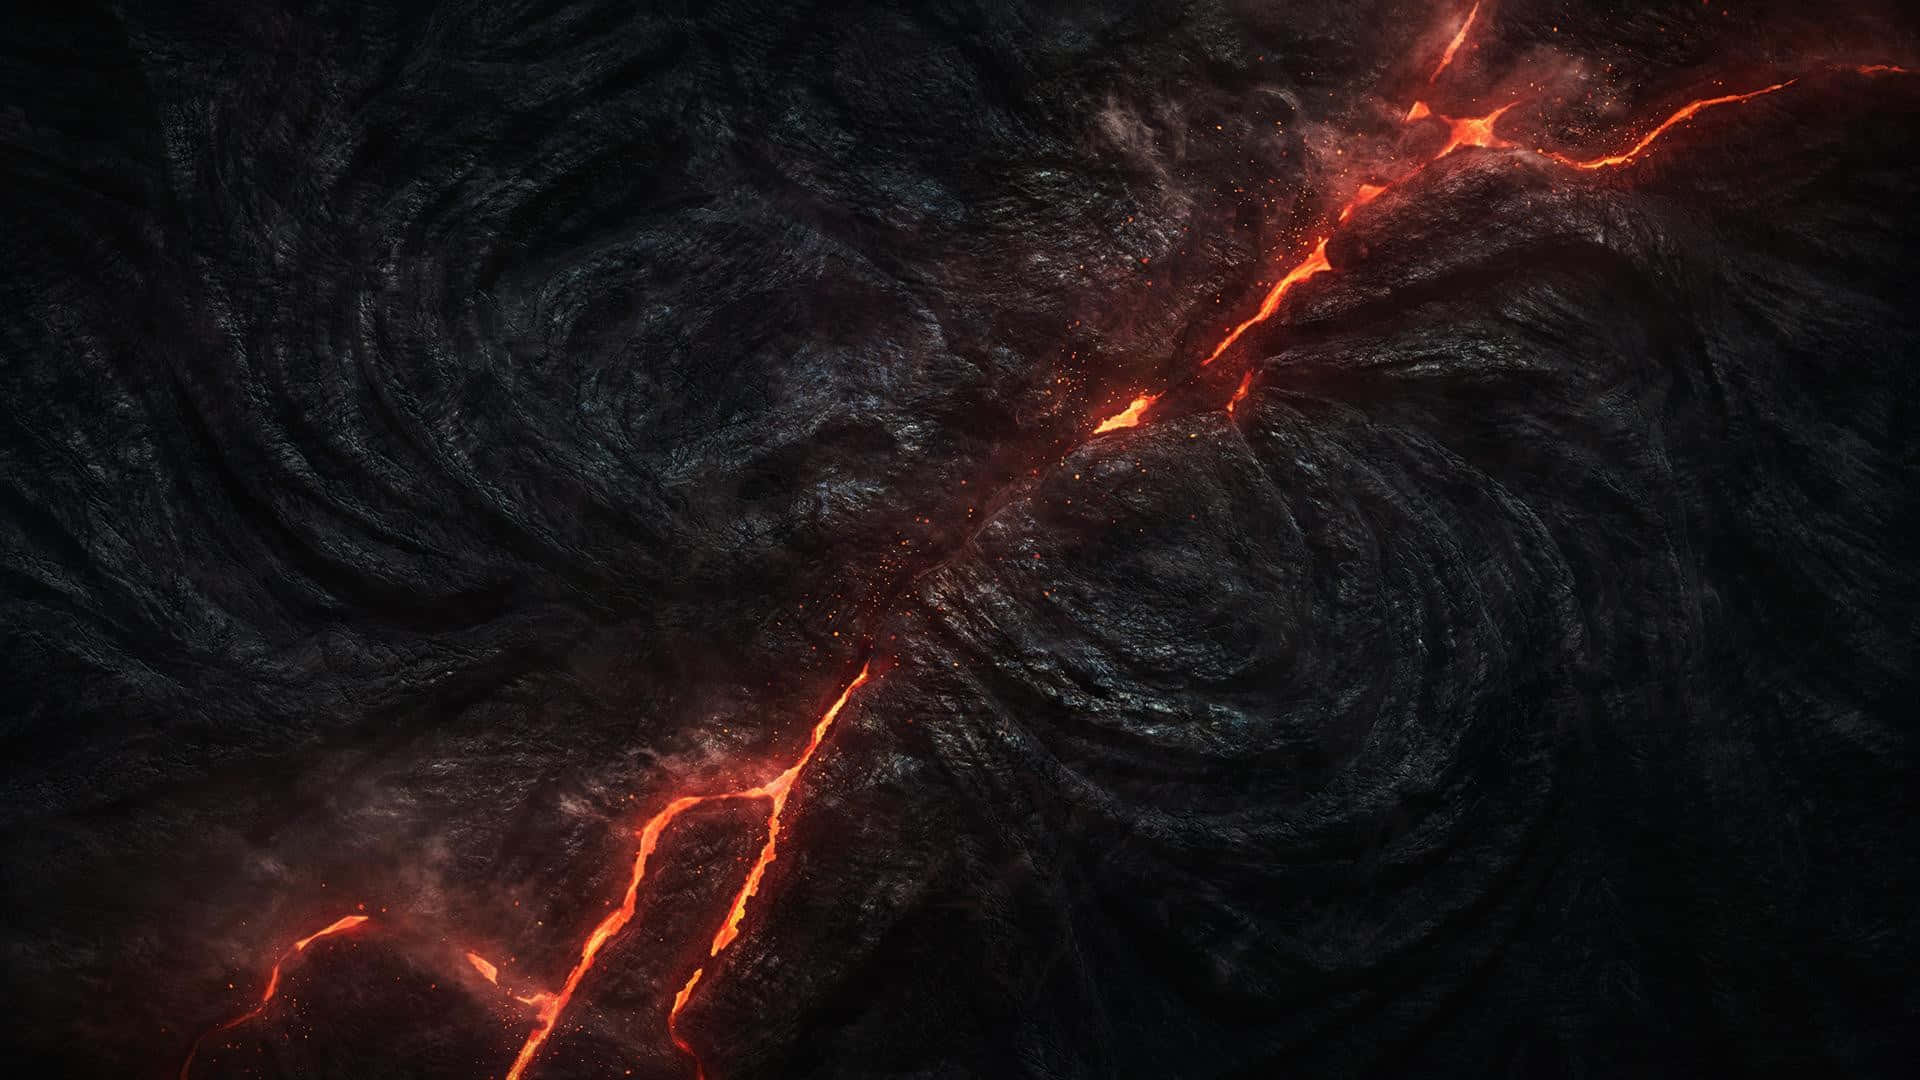 Download A Dark Background With Lava Flowing Through It